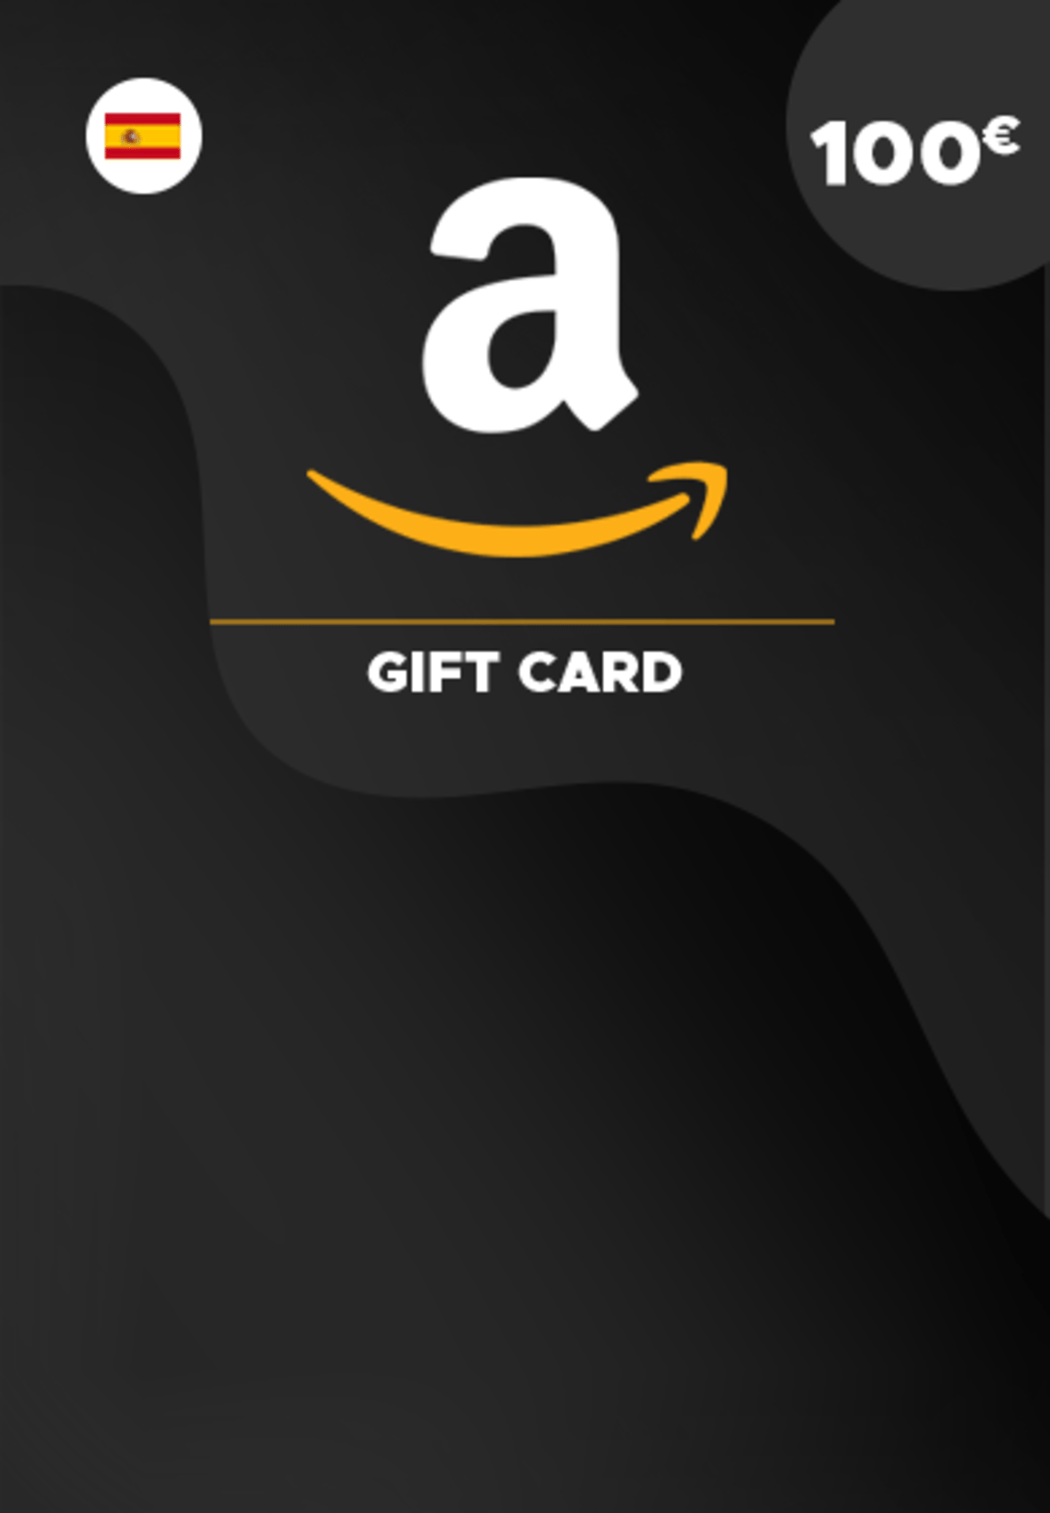 how to redeem an xbox gift card from amazon